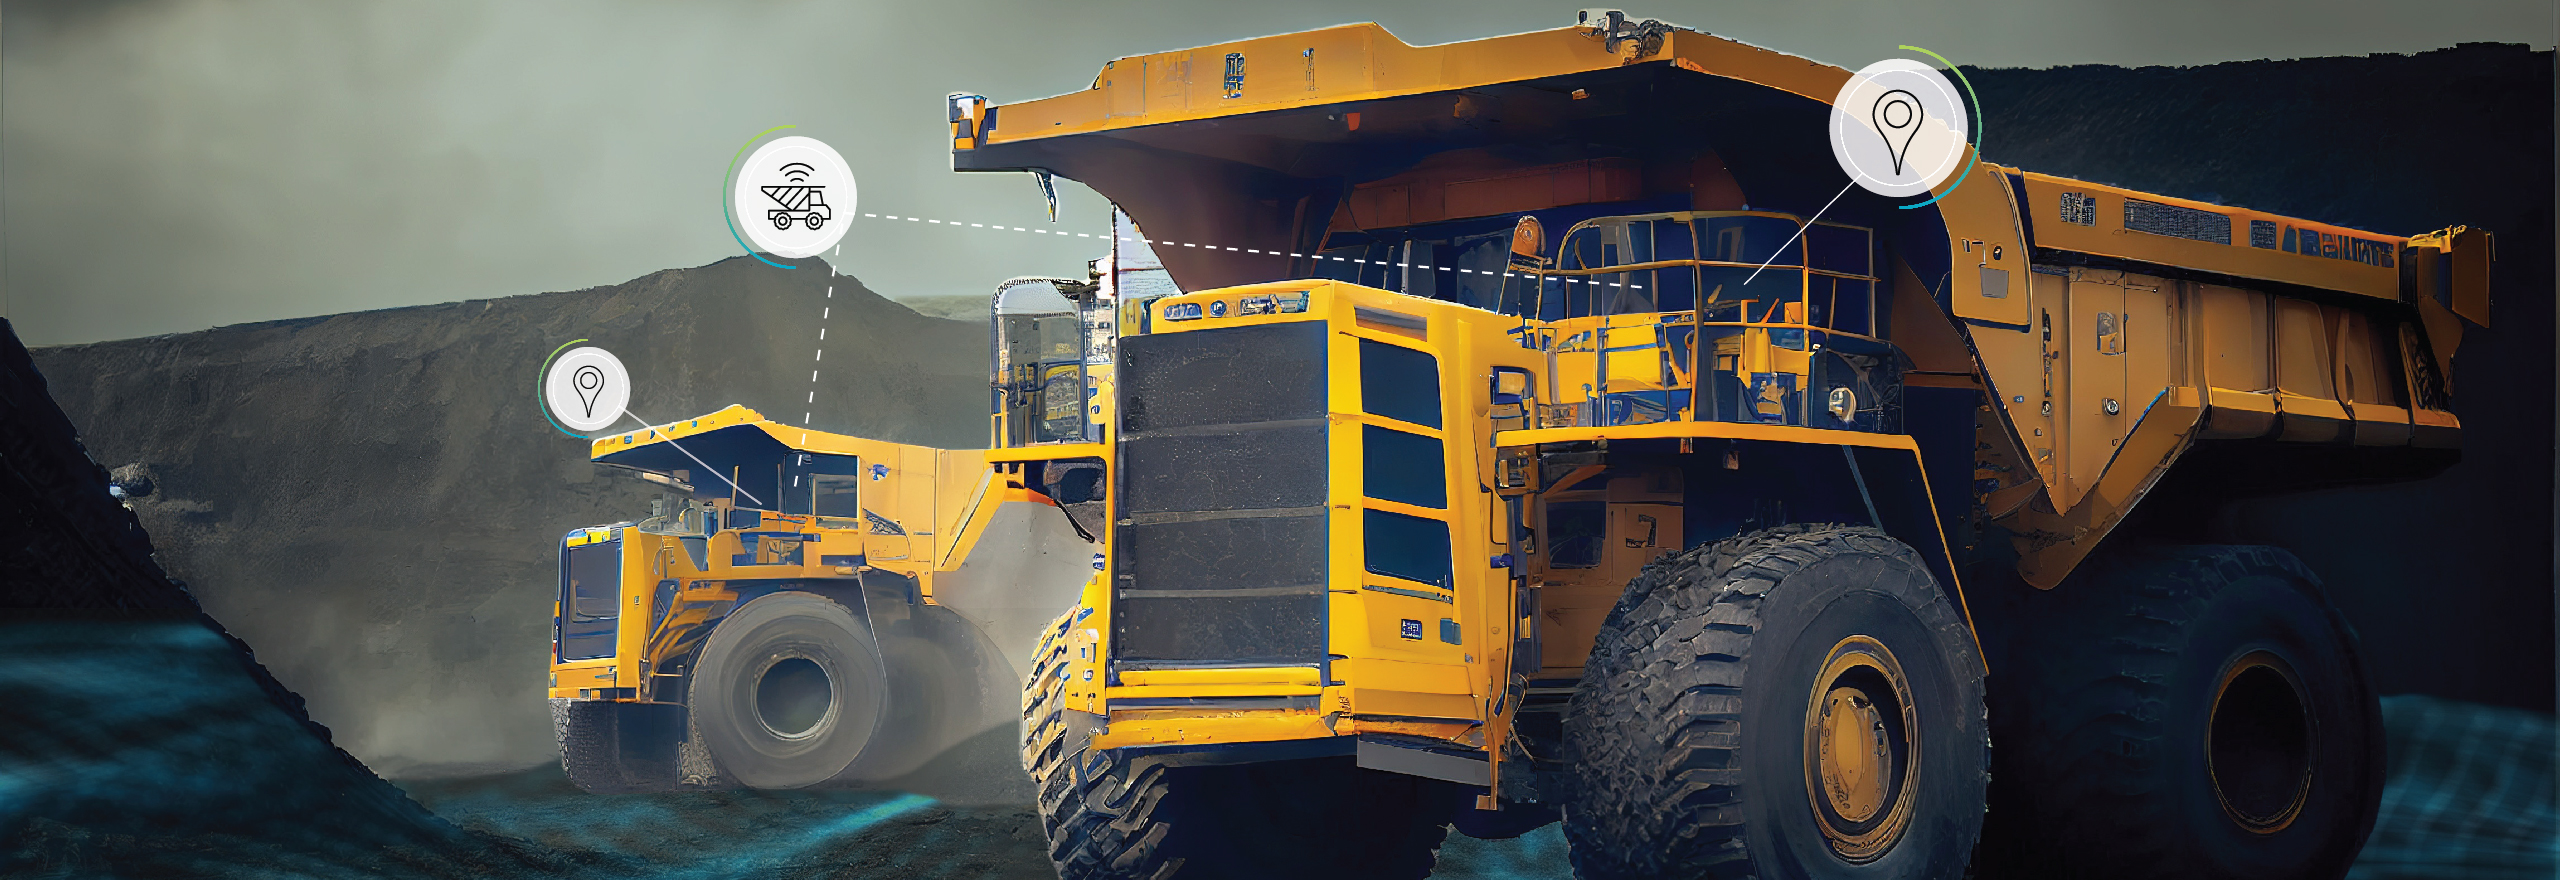 We're adding to position in maker of construction-and-mining equipment